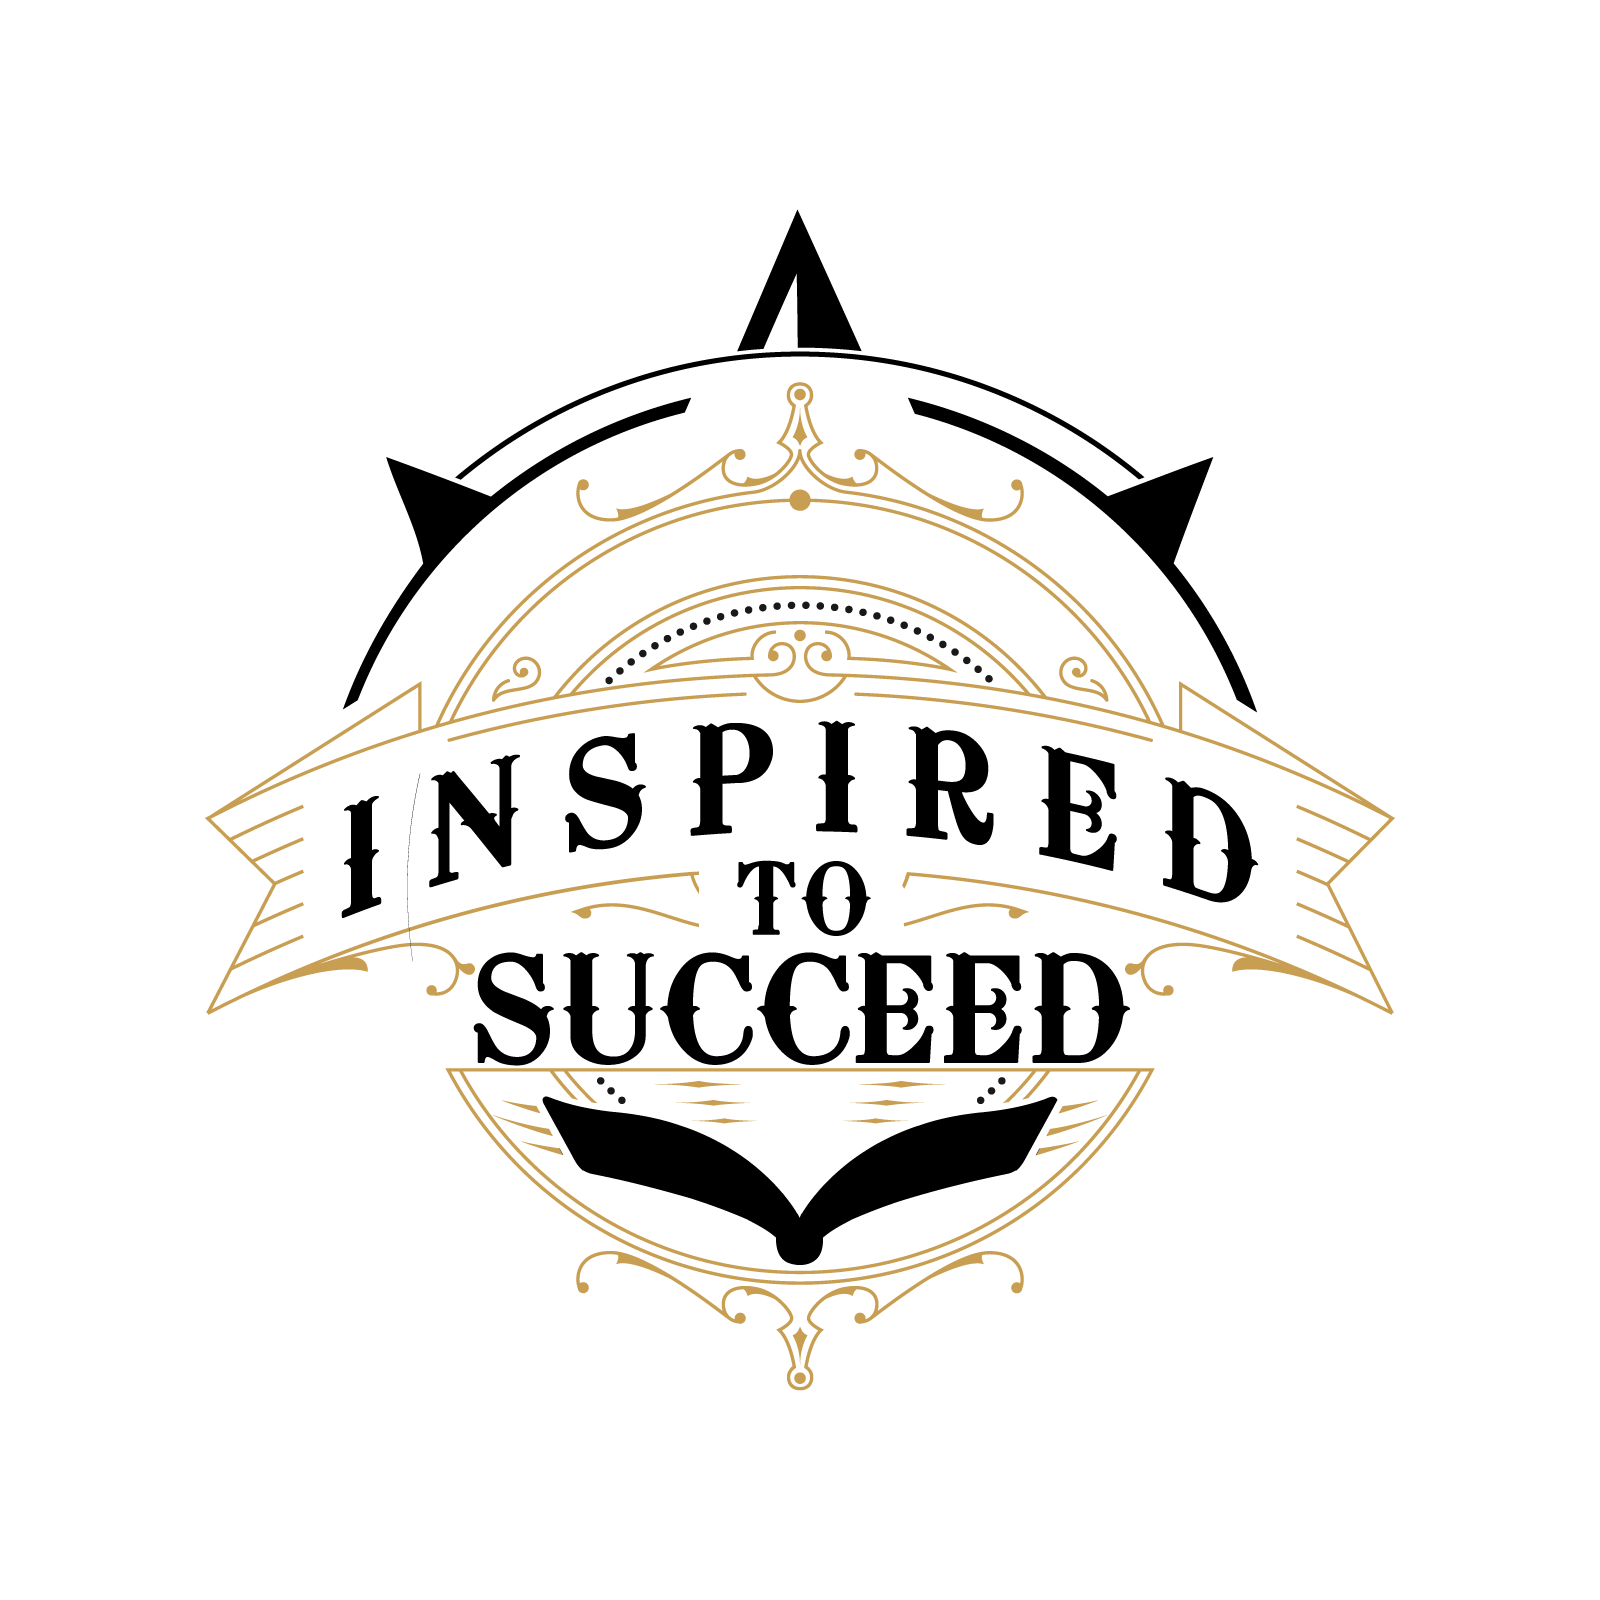 1nspired to Succeed